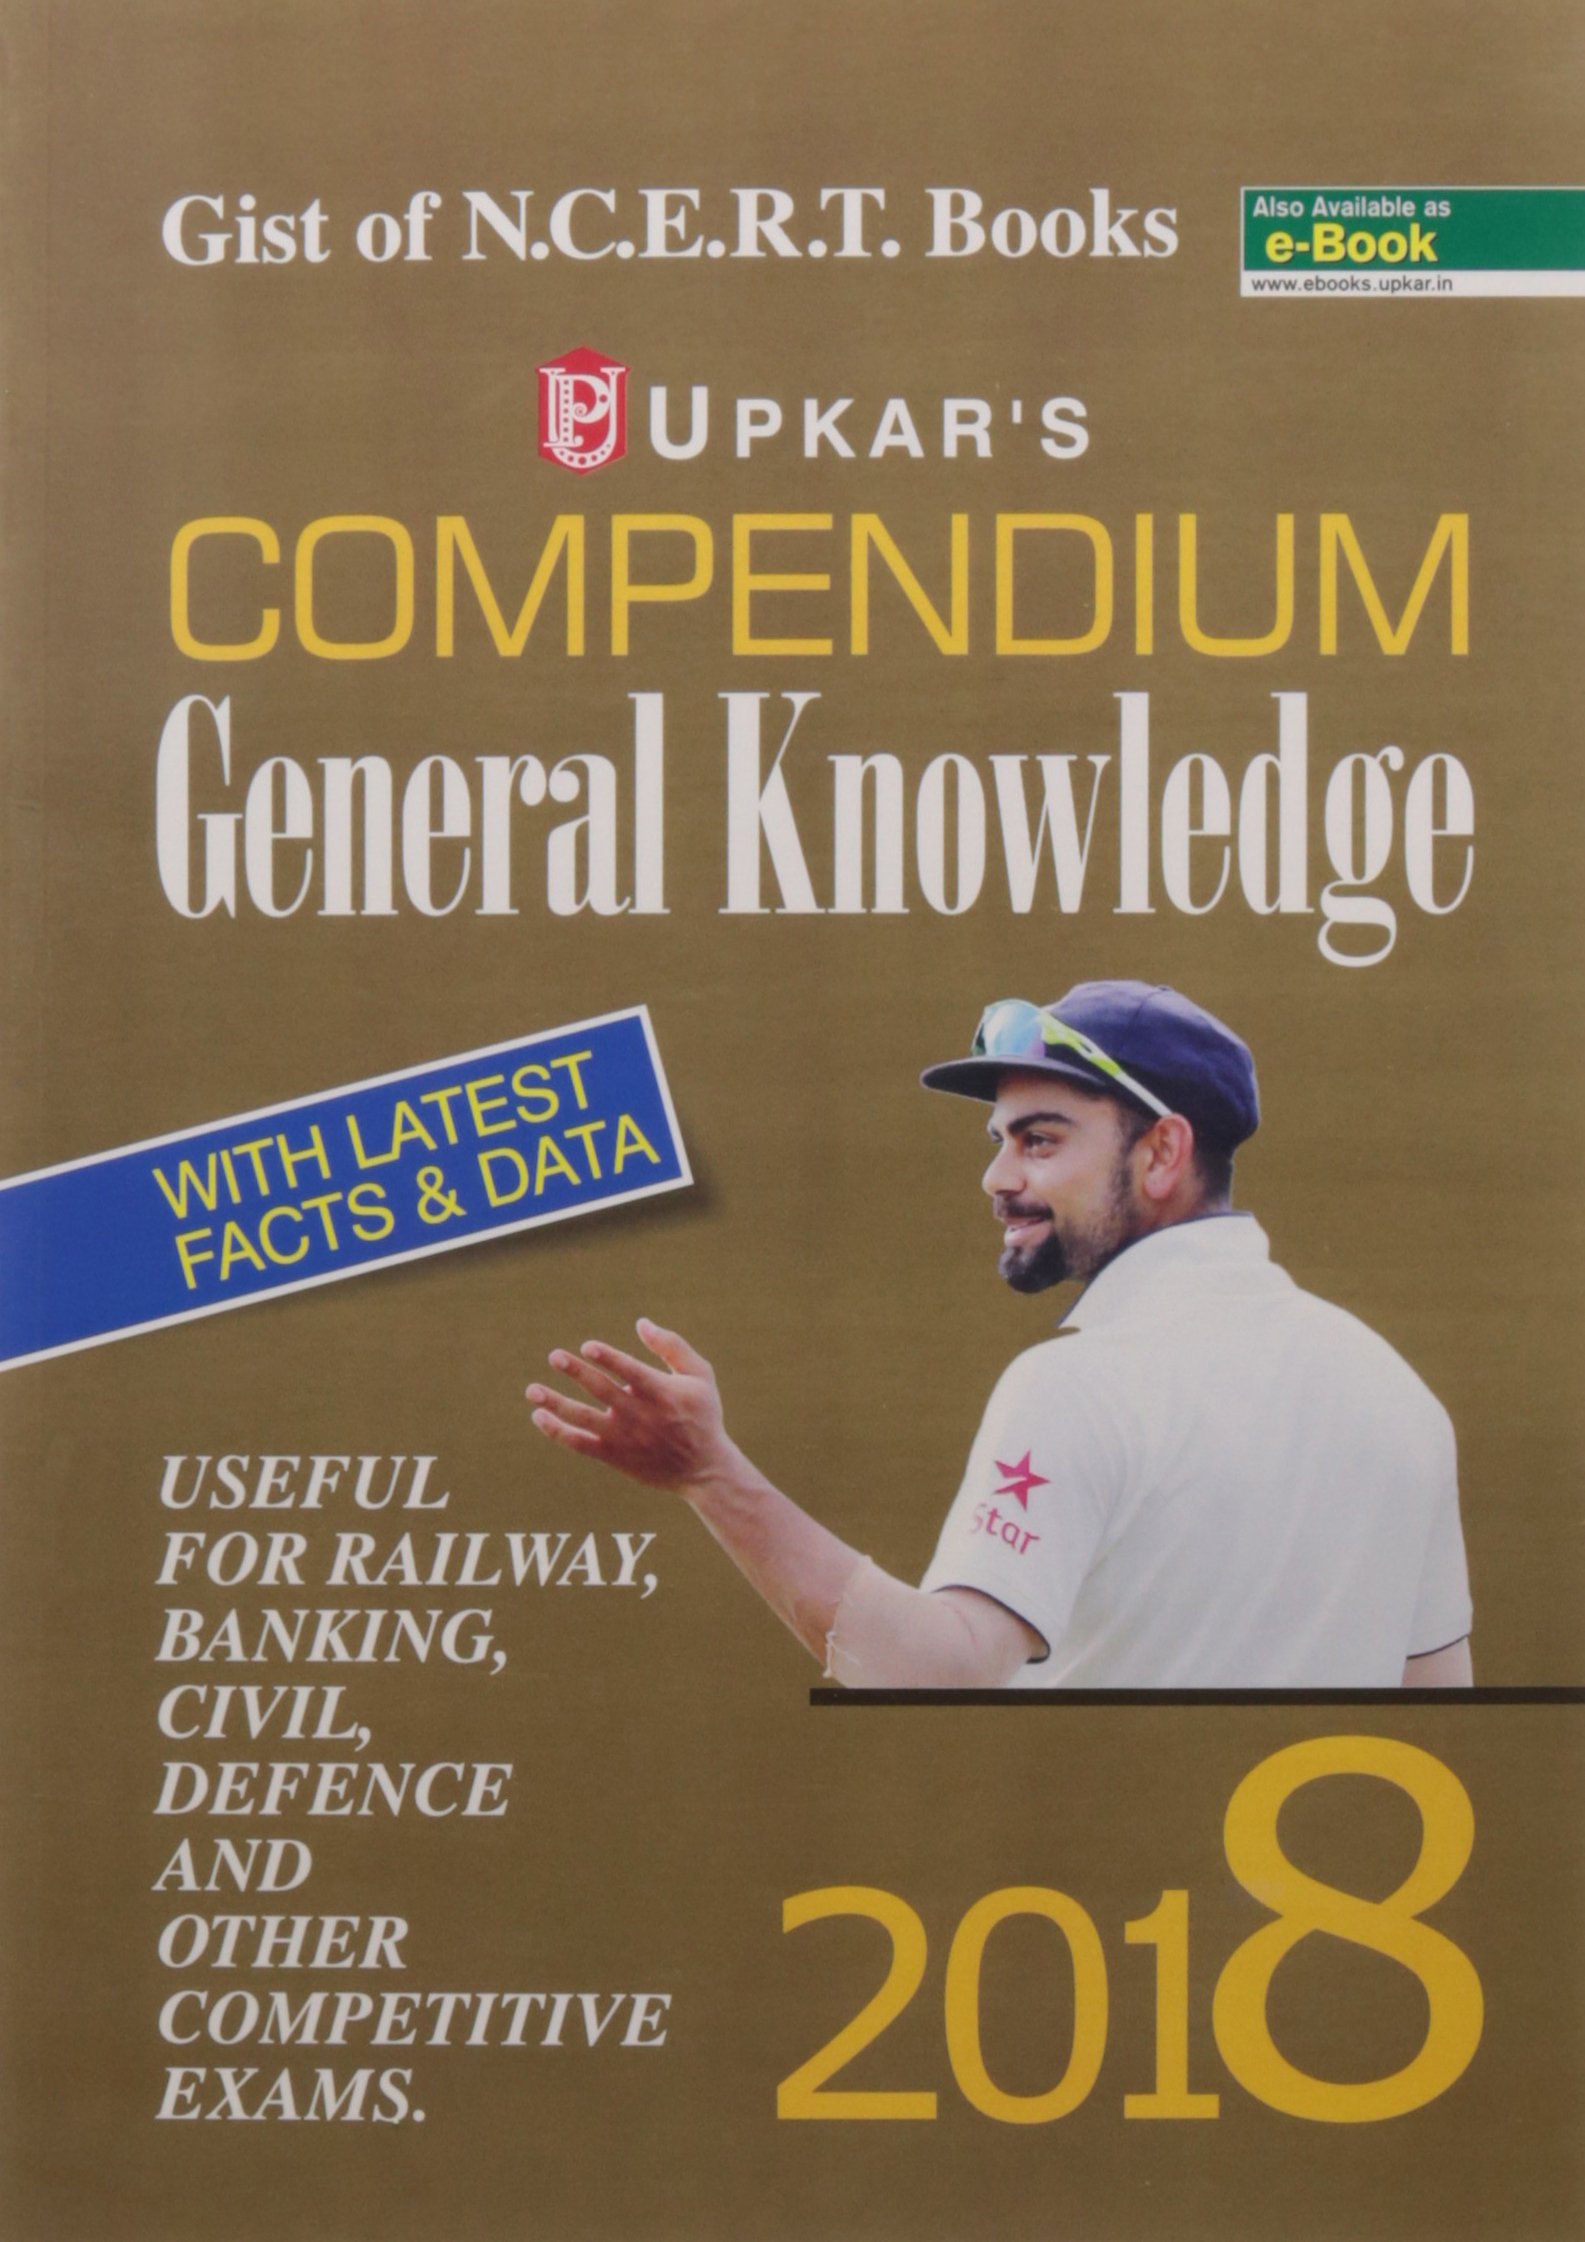 Upkar publication books for railway free download in hindi